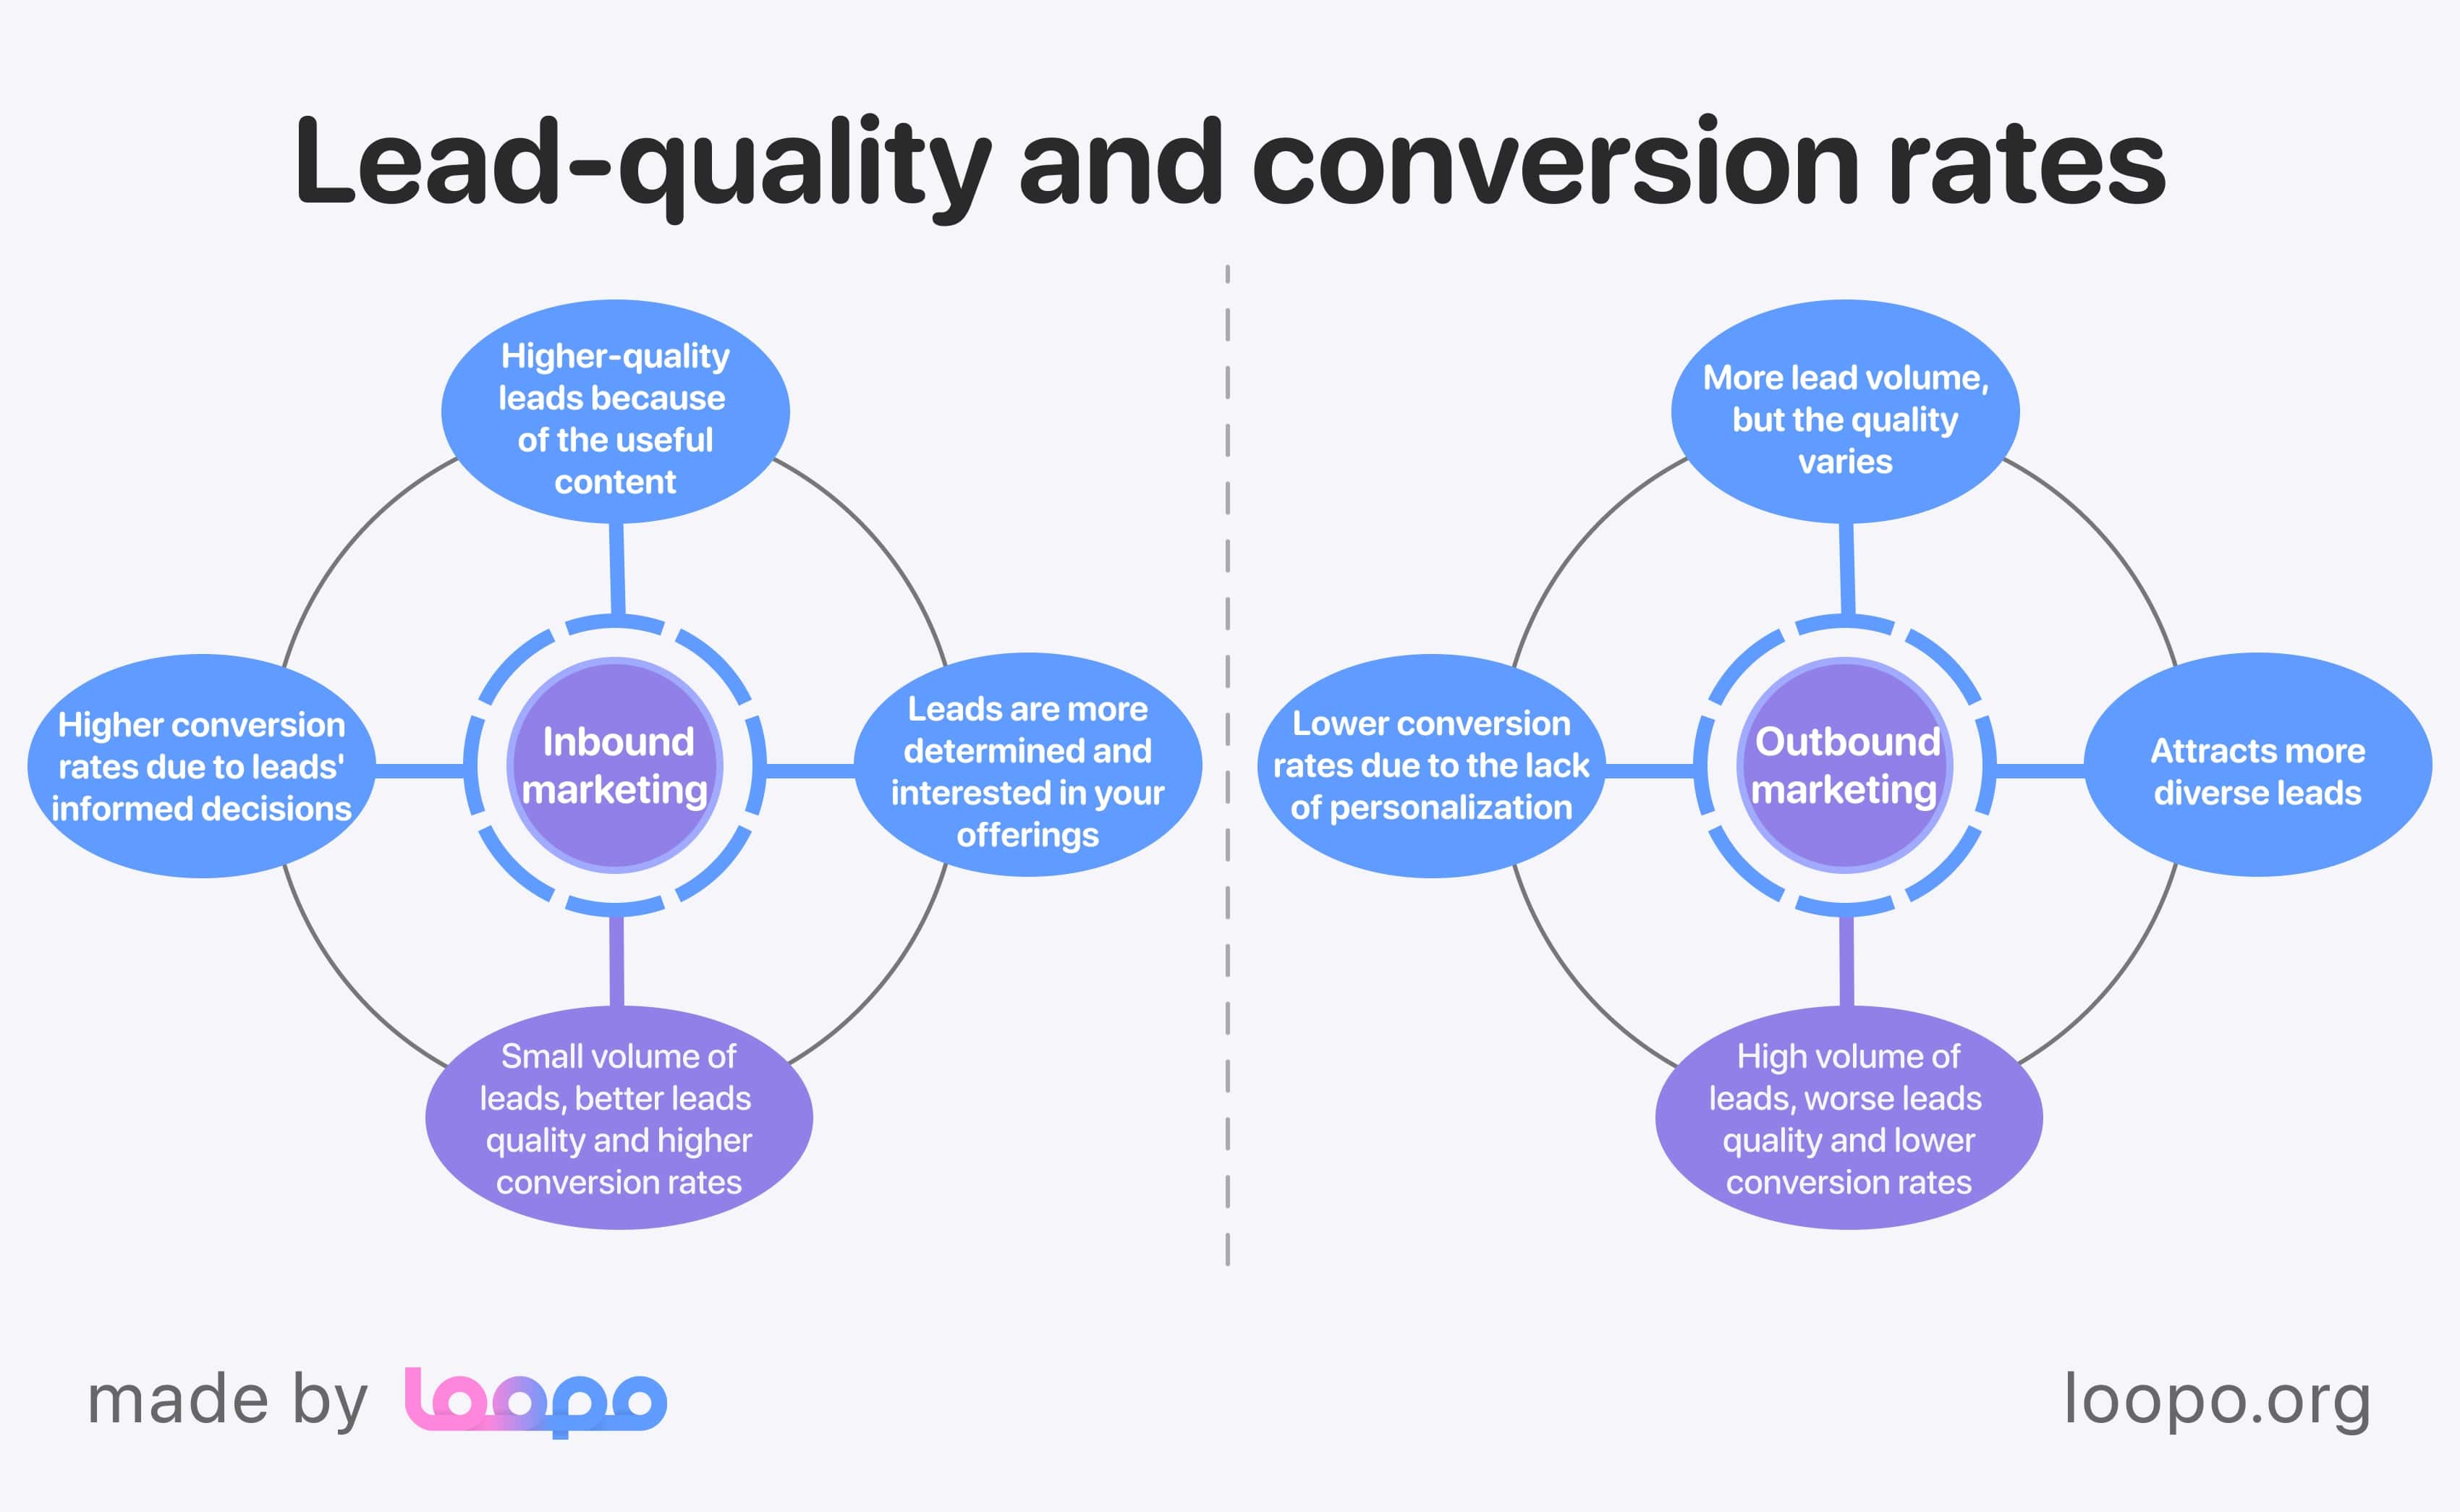 Leads quality and conversion rates in outbound and inbound marketing